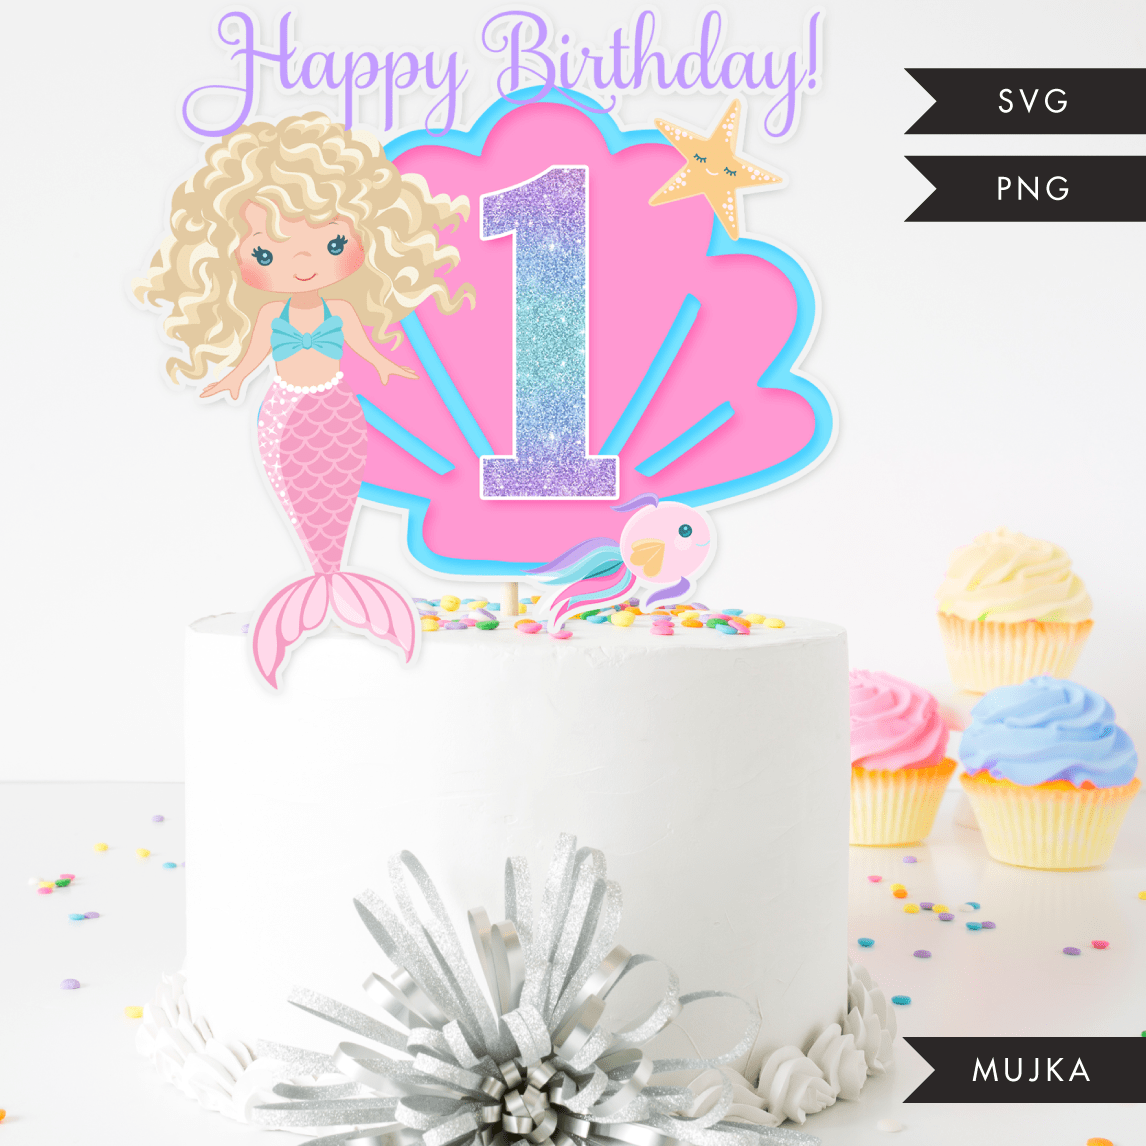 Mermaid Birthday Numbers Cake toppers SVG, PNG cutting files and clipart. Blonde curly Rainbow mermaid graphics for Cricut, Silhouette